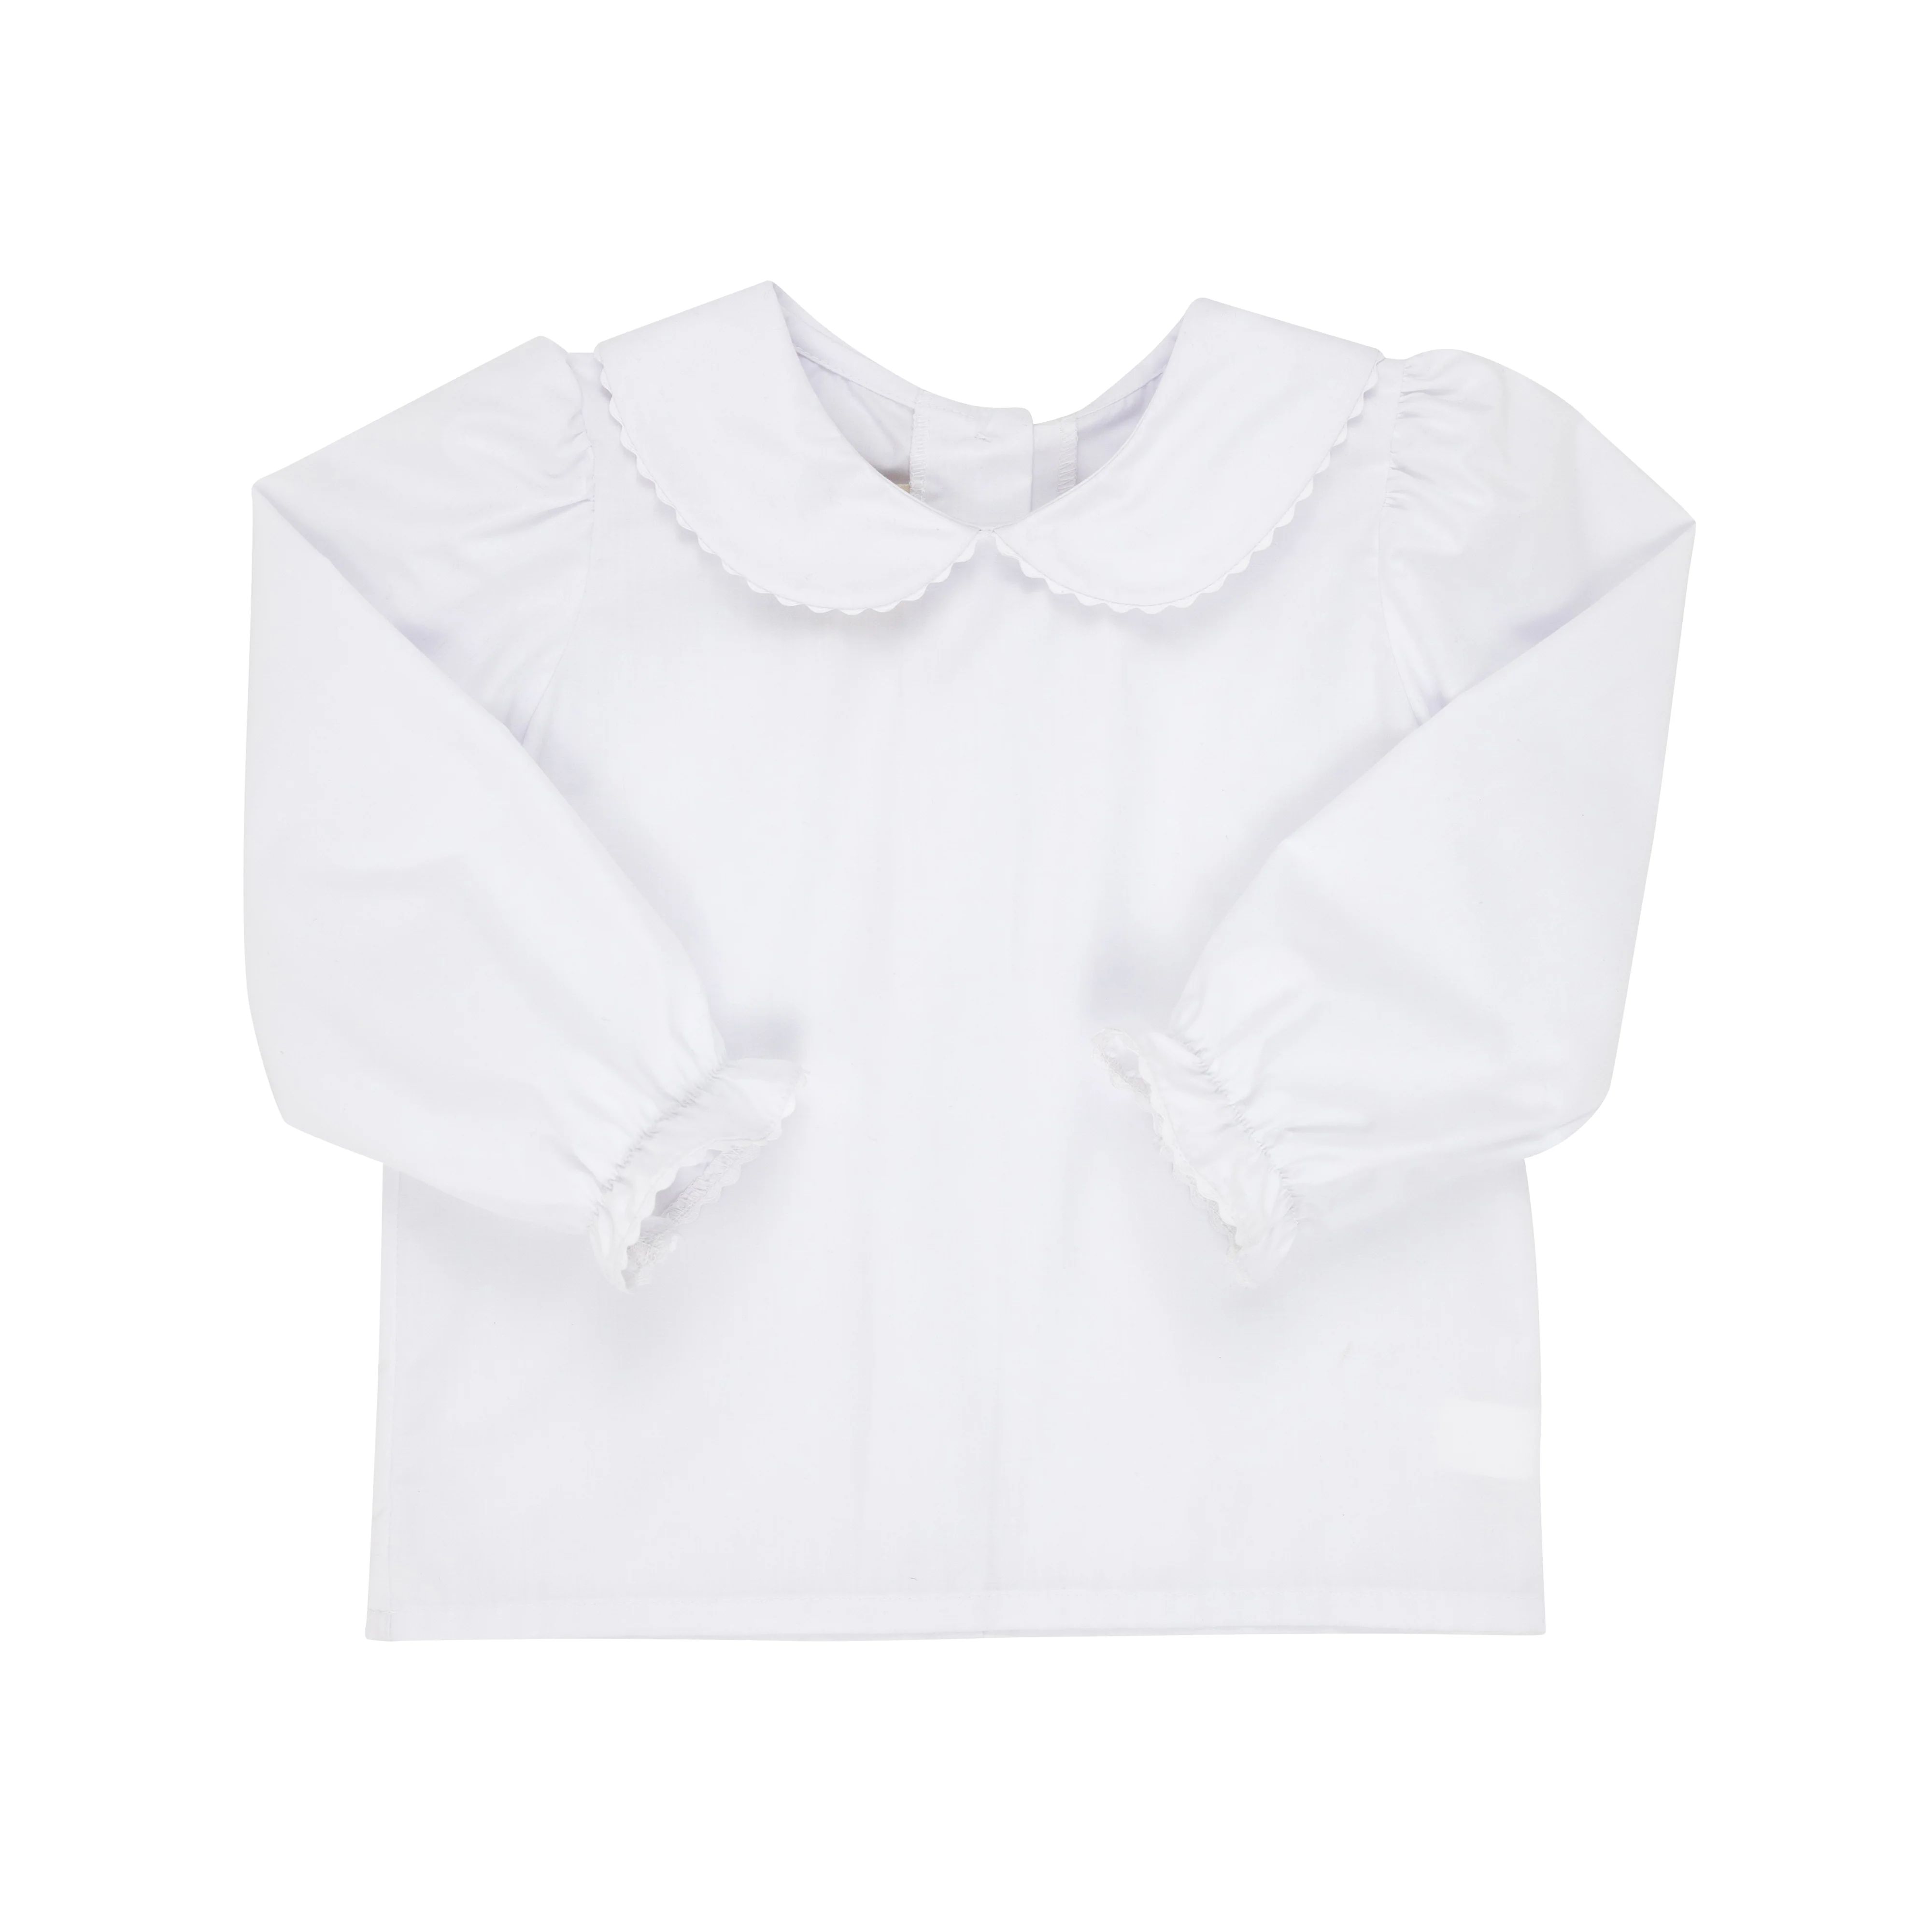 Maude's Peter Pan Collar Shirt & Onesie (Long Sleeve Woven) - Worth Avenue White with Ric Rac | The Beaufort Bonnet Company